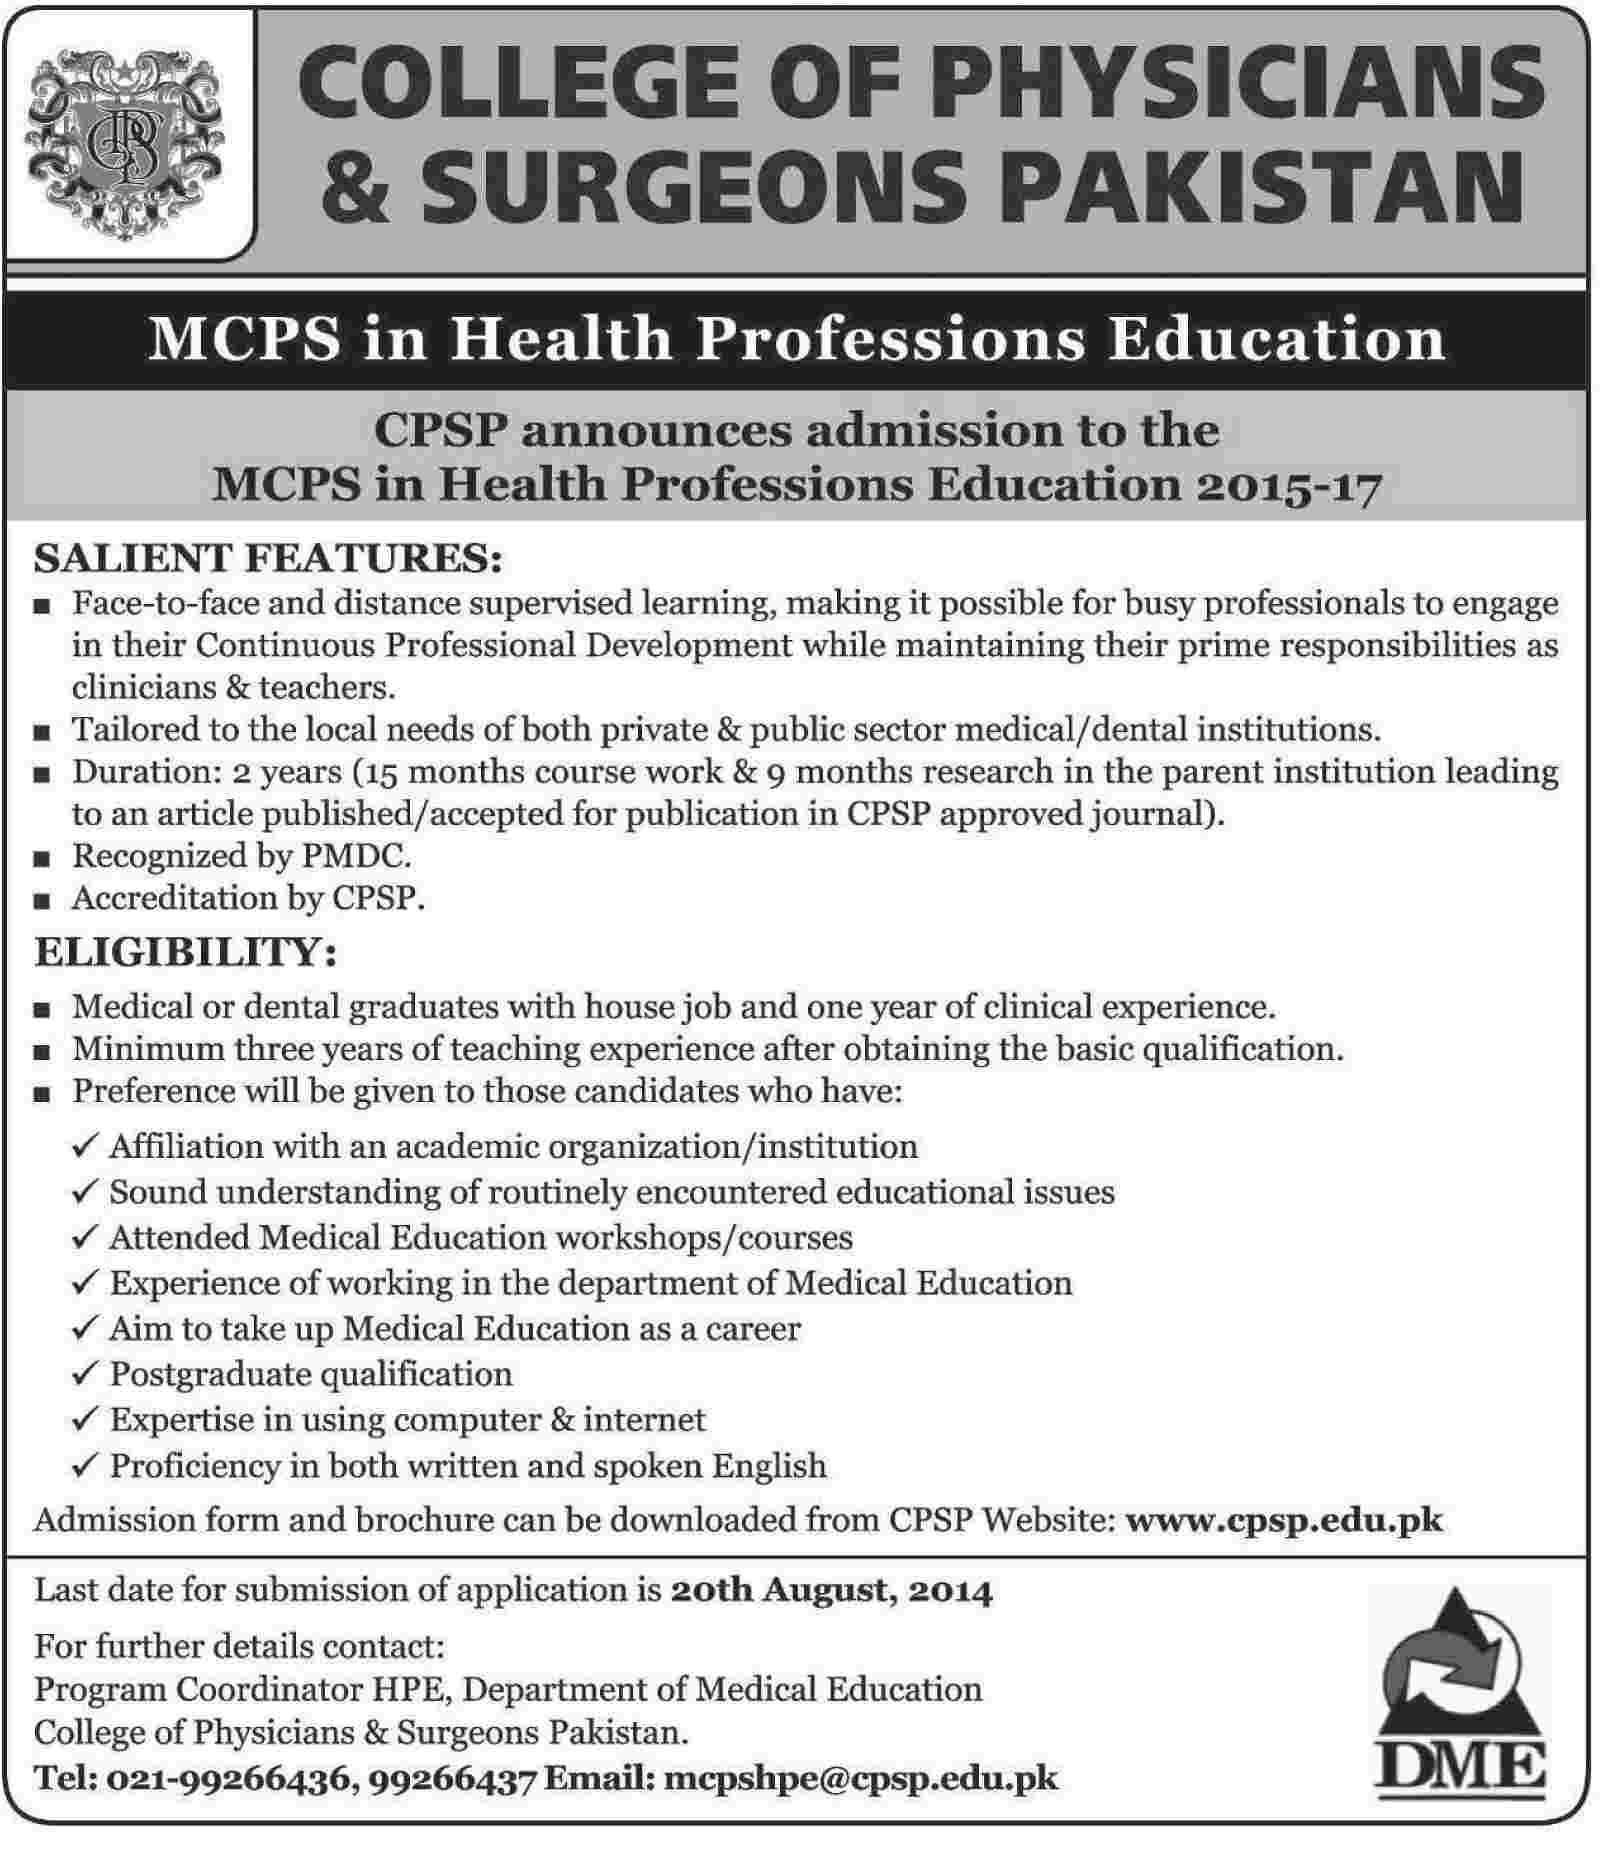 CPSP Admission Notice for MCPS in Health Professions Education 2015